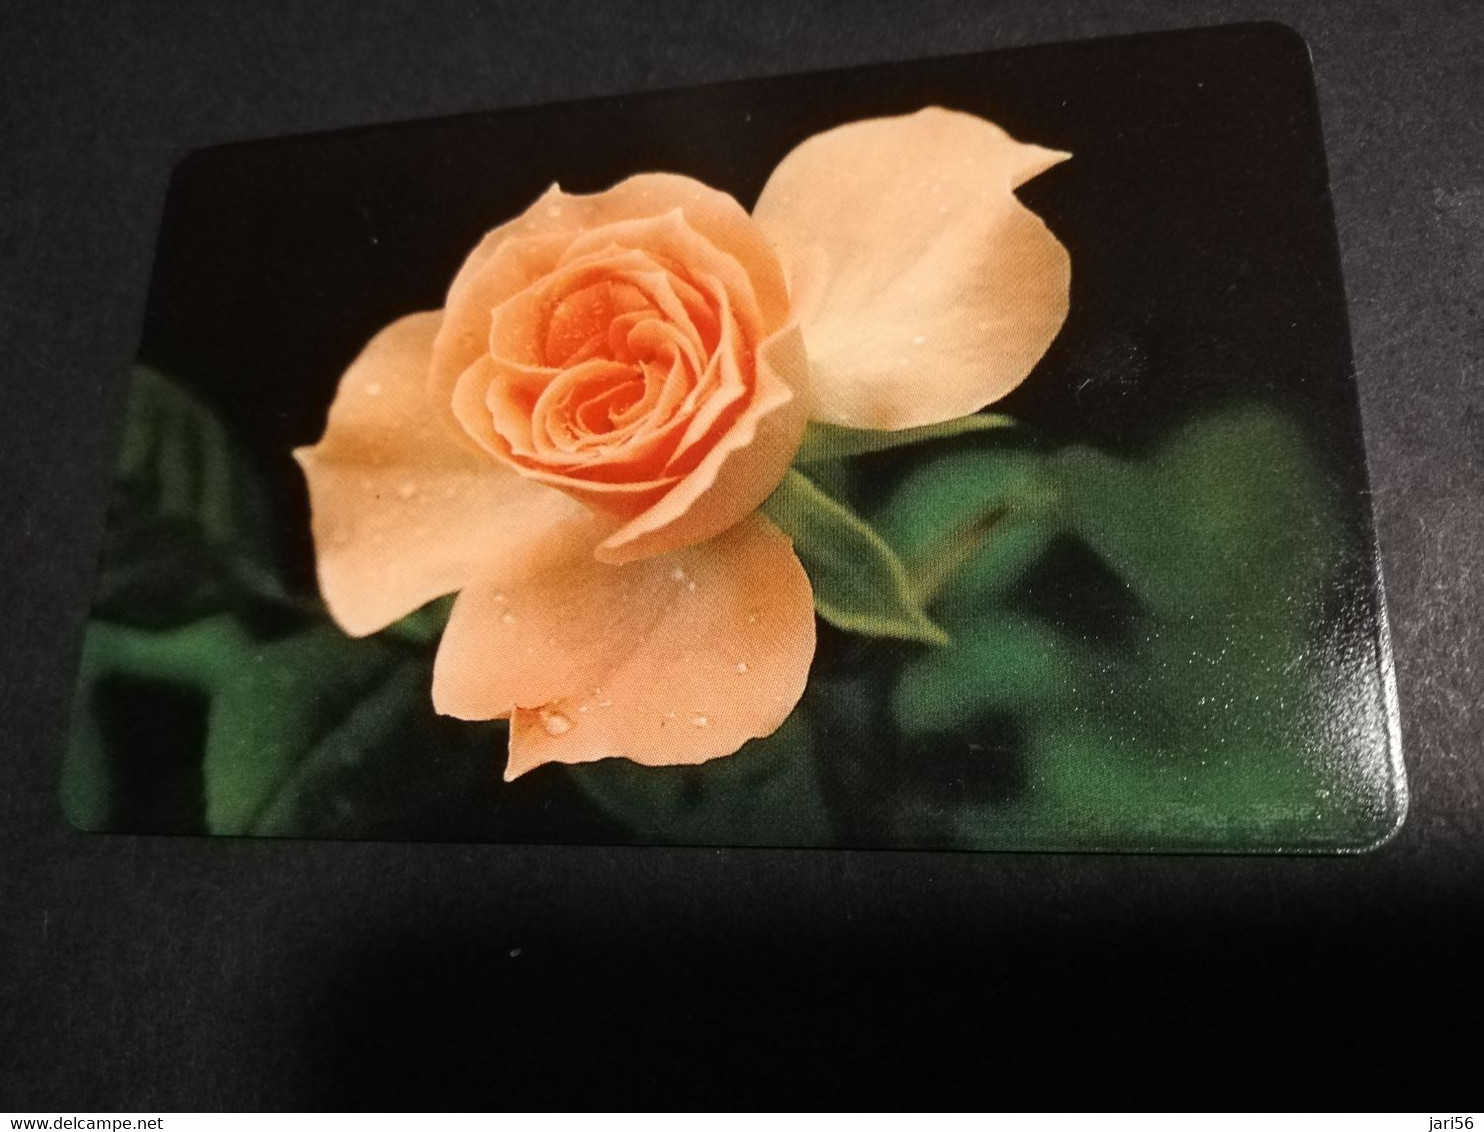 GREAT BRETAGNE  CHIPCARDS / TRIAL CARD 10 POUND   4438 BT / BACKSIDE ROSE /FLOWER PERFECT  CONDITION      **4454** - BT General